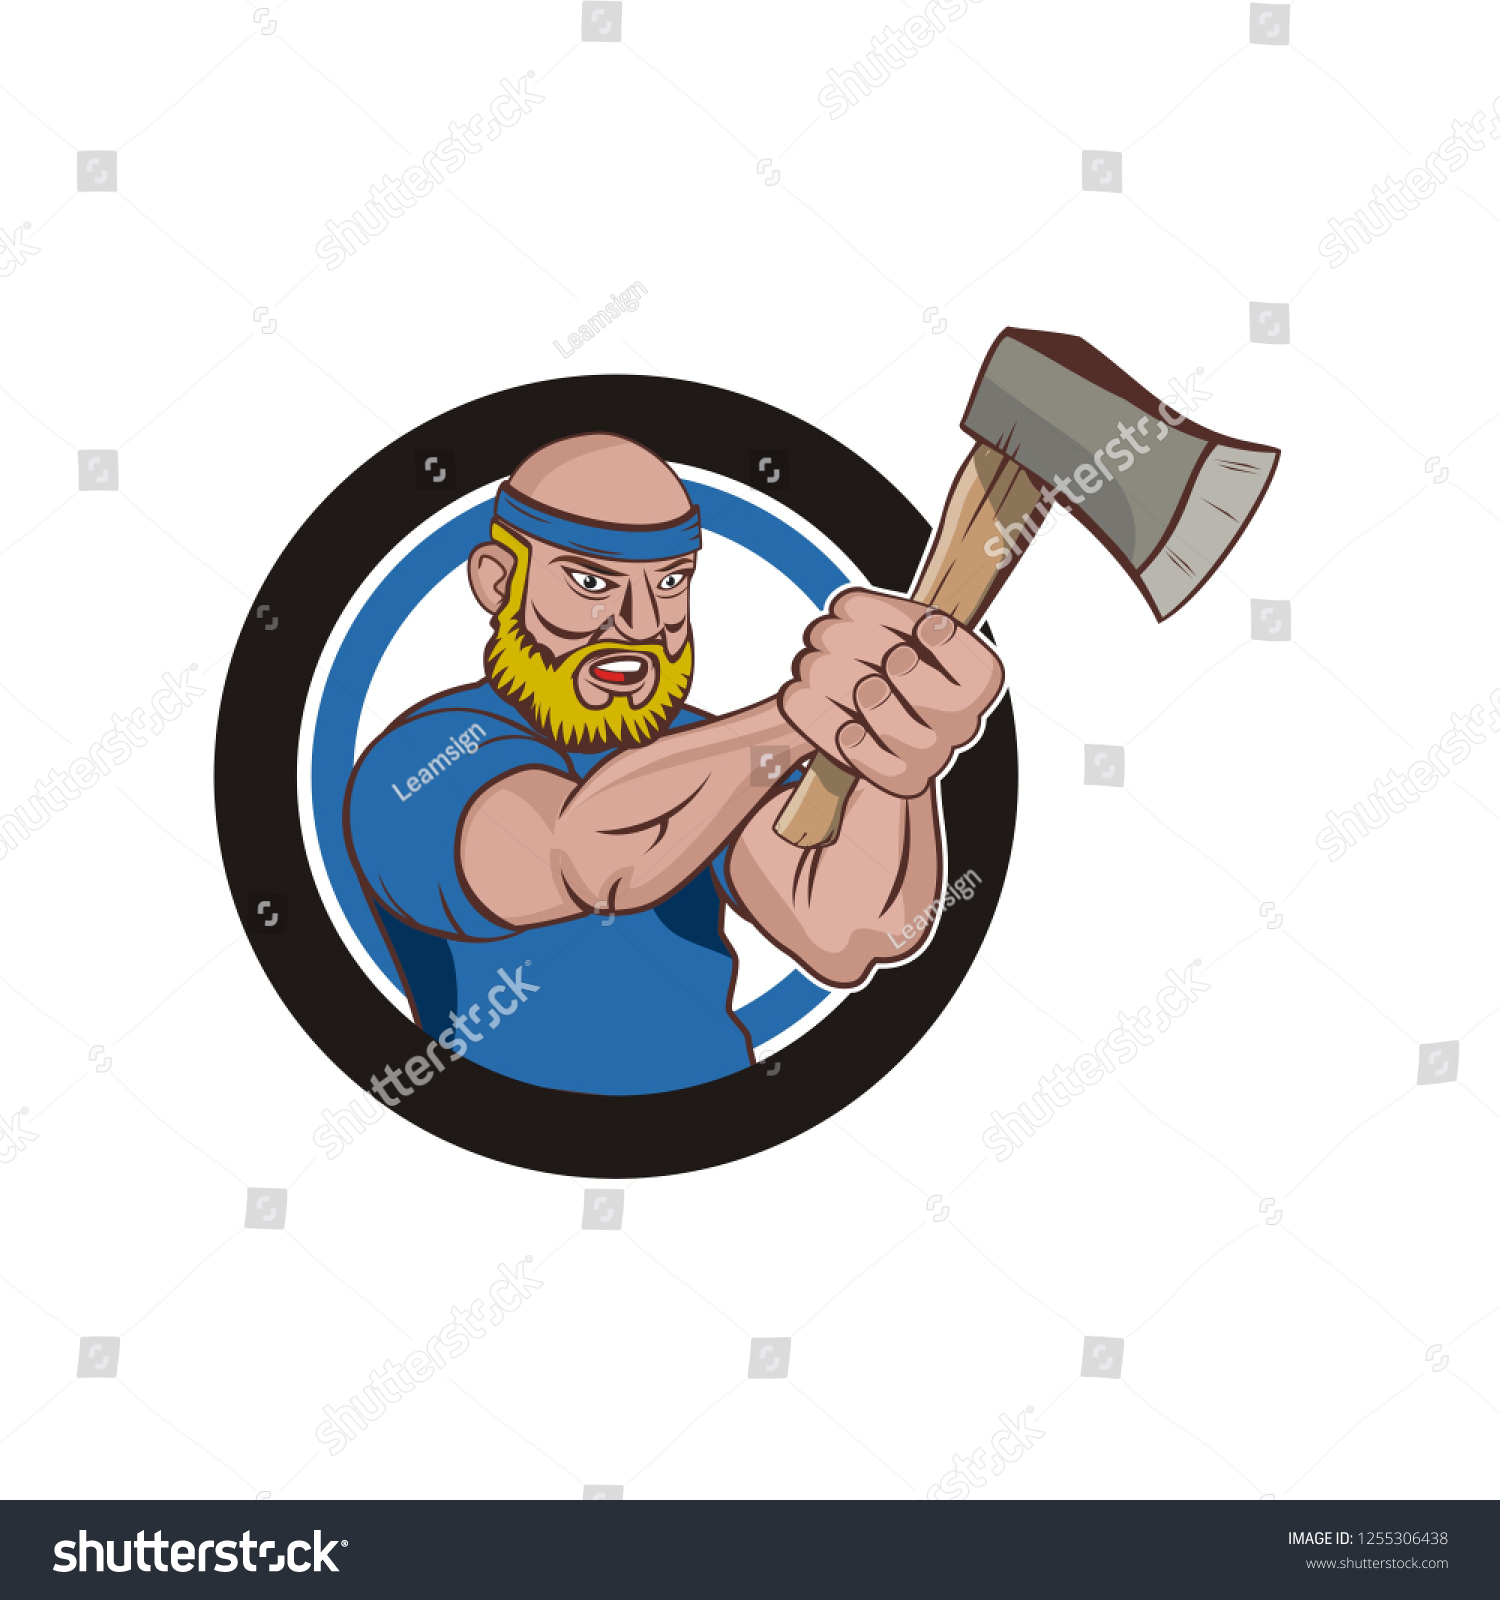 SVG of A man master cartoon character axe throwing

 svg